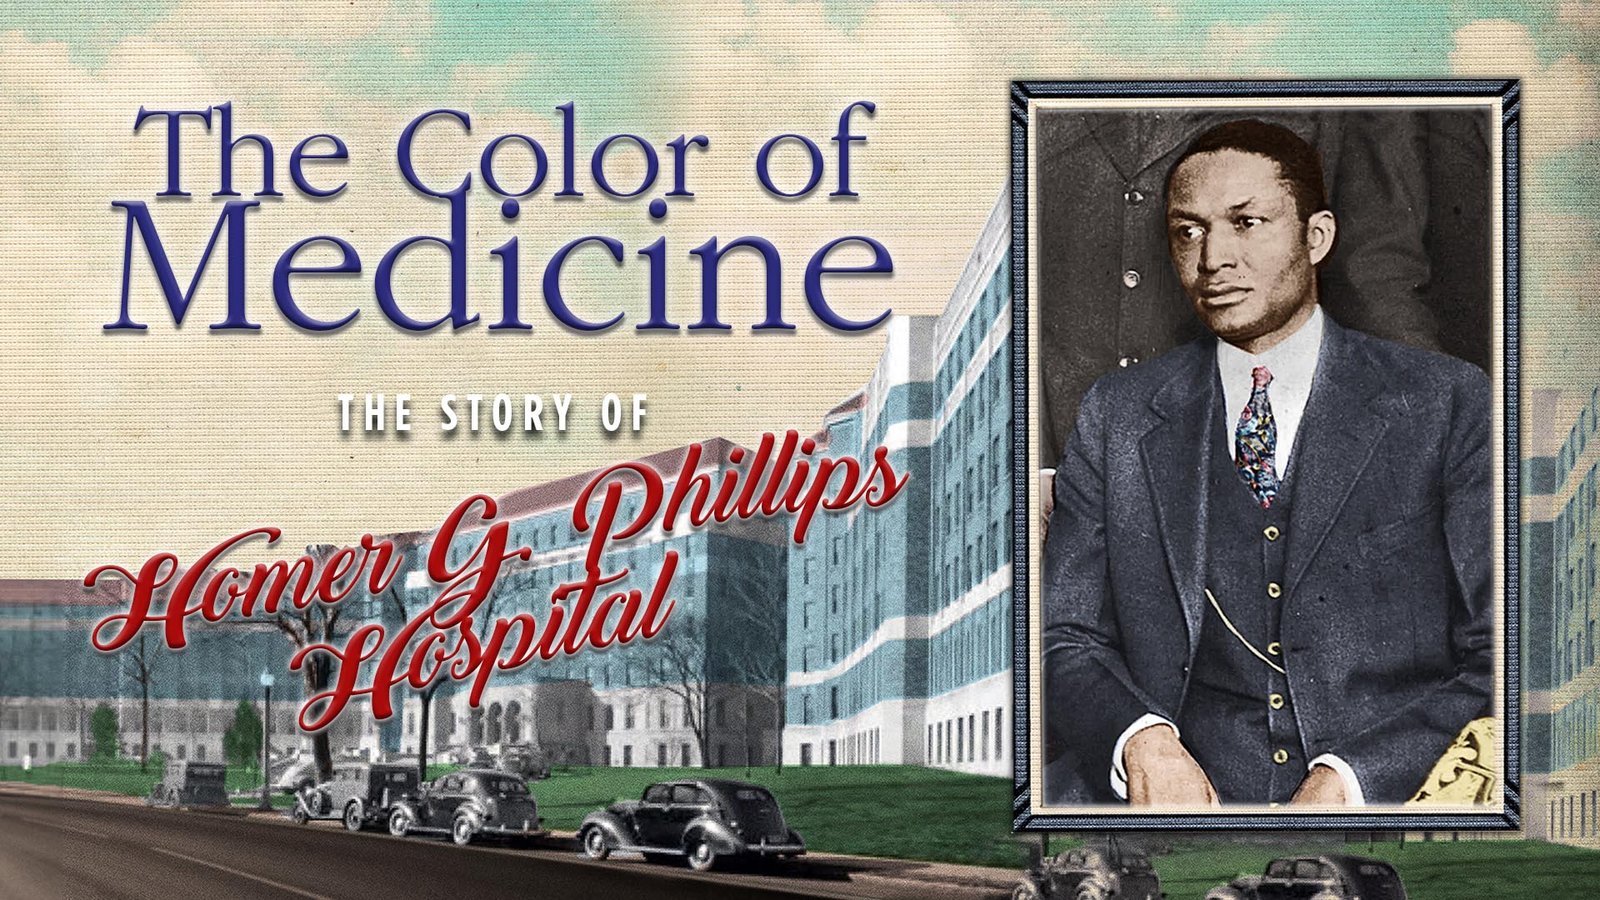 Color of Medicine: The Story of Homer G. Phillips Hospital